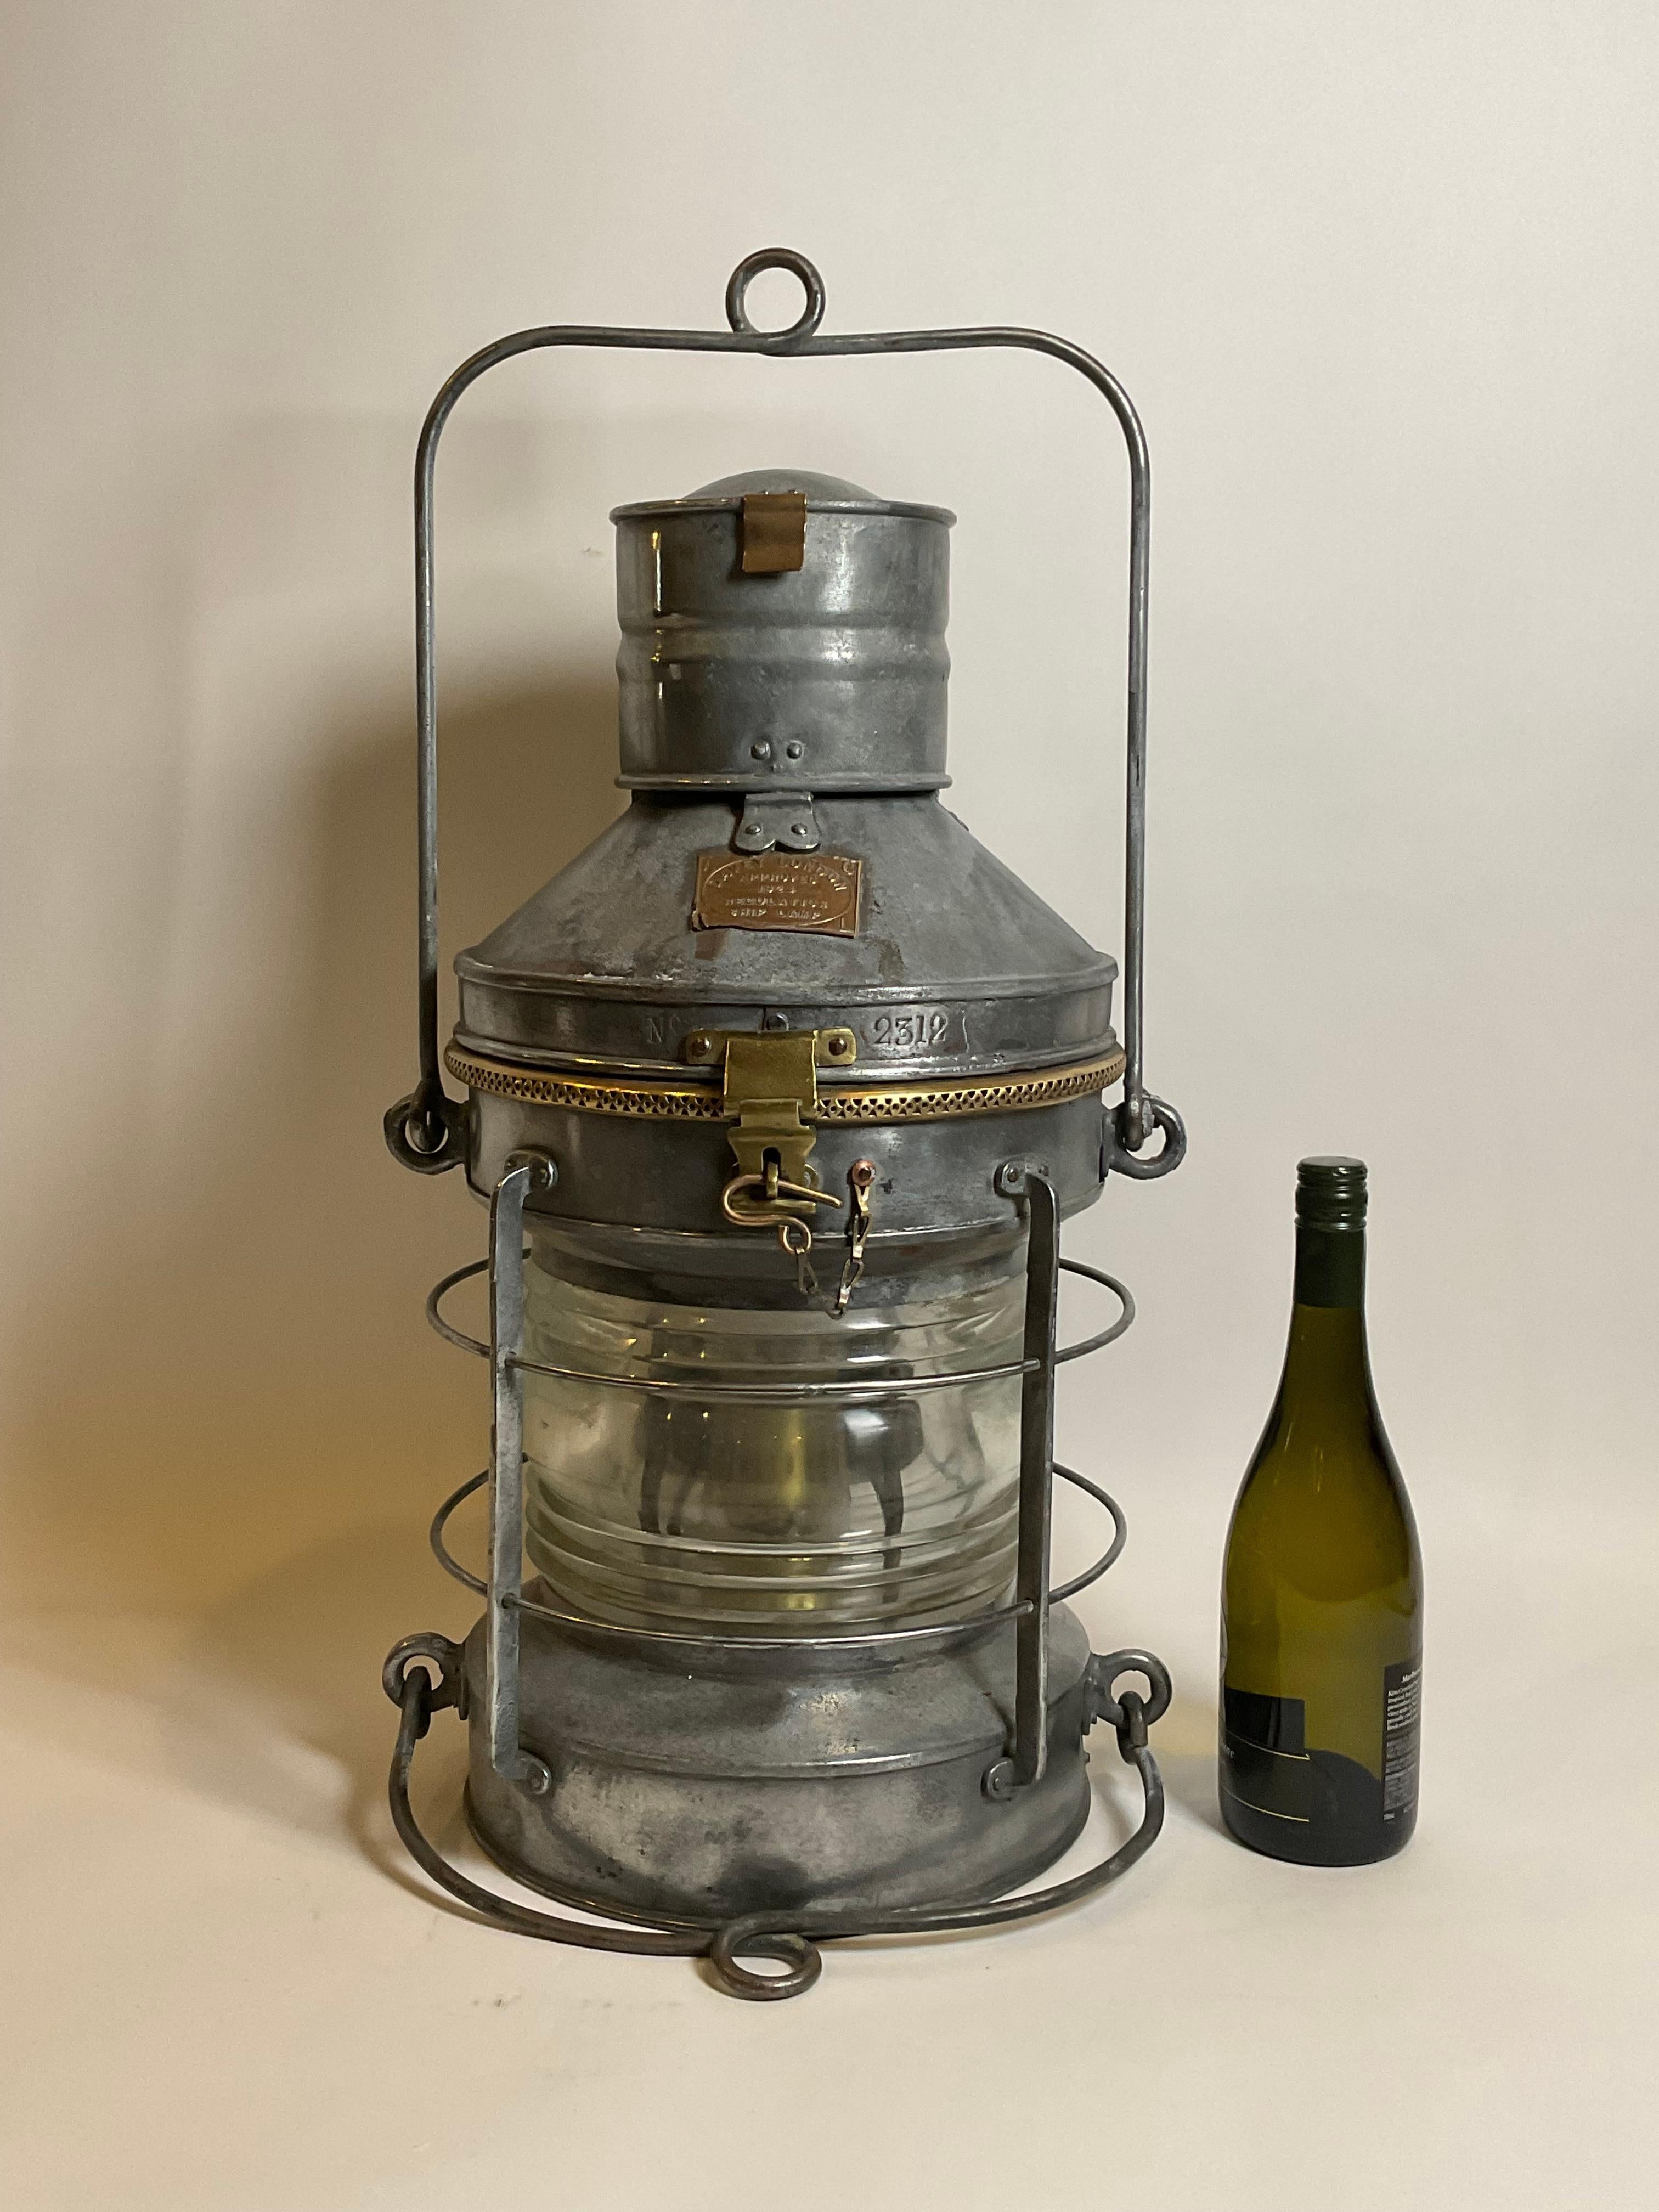 Lantern by the famous English maker Davey of London. With brass makers badge from Davey of London, regulation ship lamp dated 1924. Sturdily Built. Fitted with a Fresnel glass lens and original burner. Fine nautical Antique. Hinge top with brass